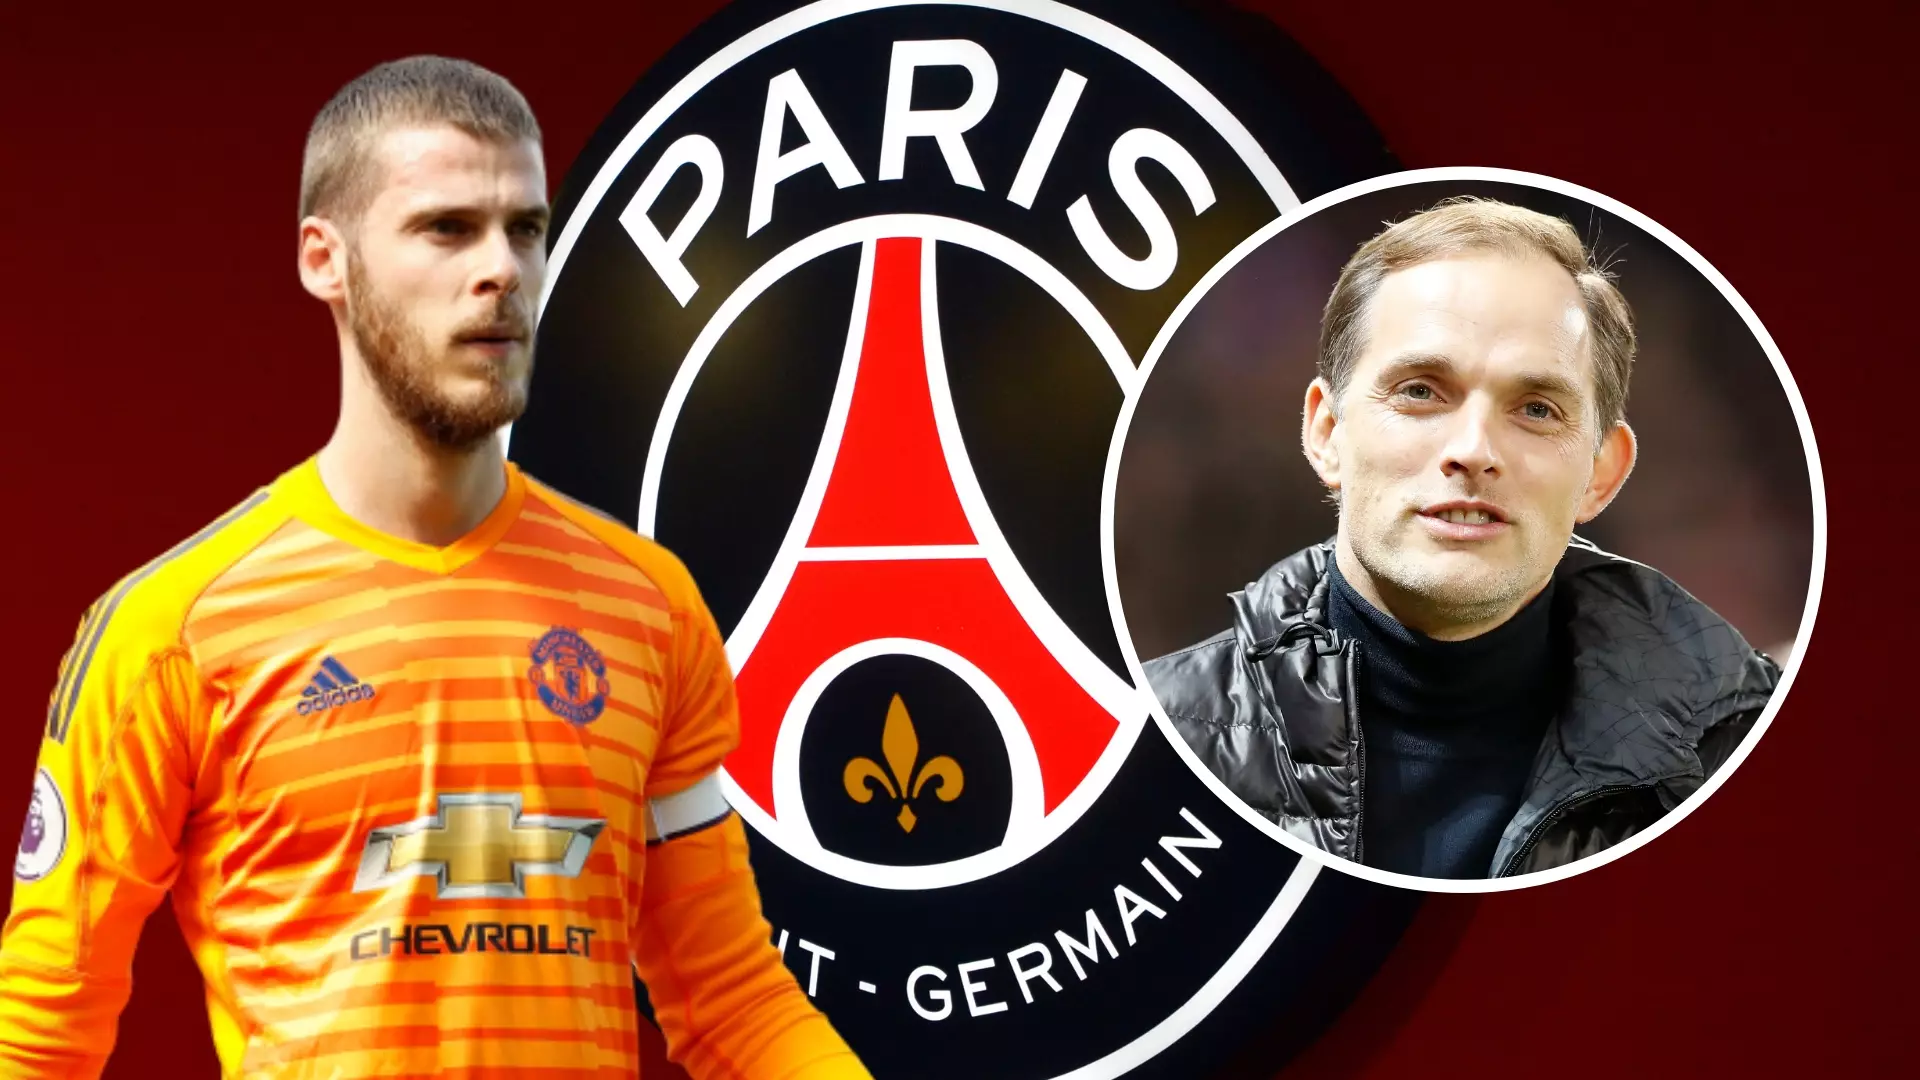 PSG Make An Approach For De Gea After Submitting ‘First Offer’ To Manchester United